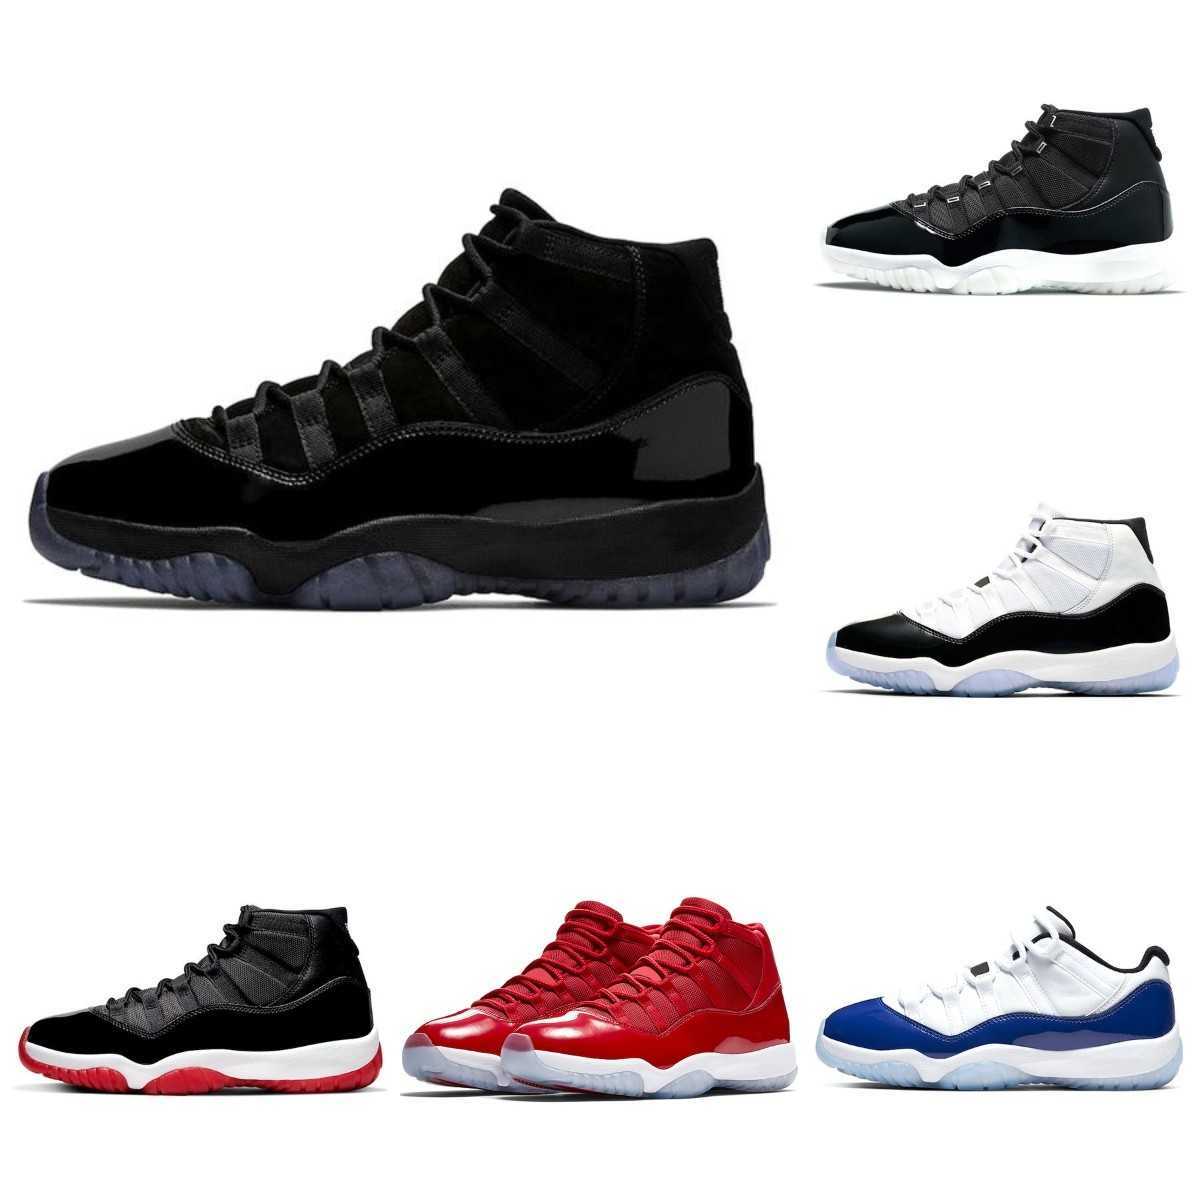 

Basketball 2023 Shoes Jumpman 11 Trainer High Quality Sneakers 11s Men Women 25th Anniversary Bred Space Jam Win Like Easter Concord 45 Low Columbia Designer S01, #4 white bred